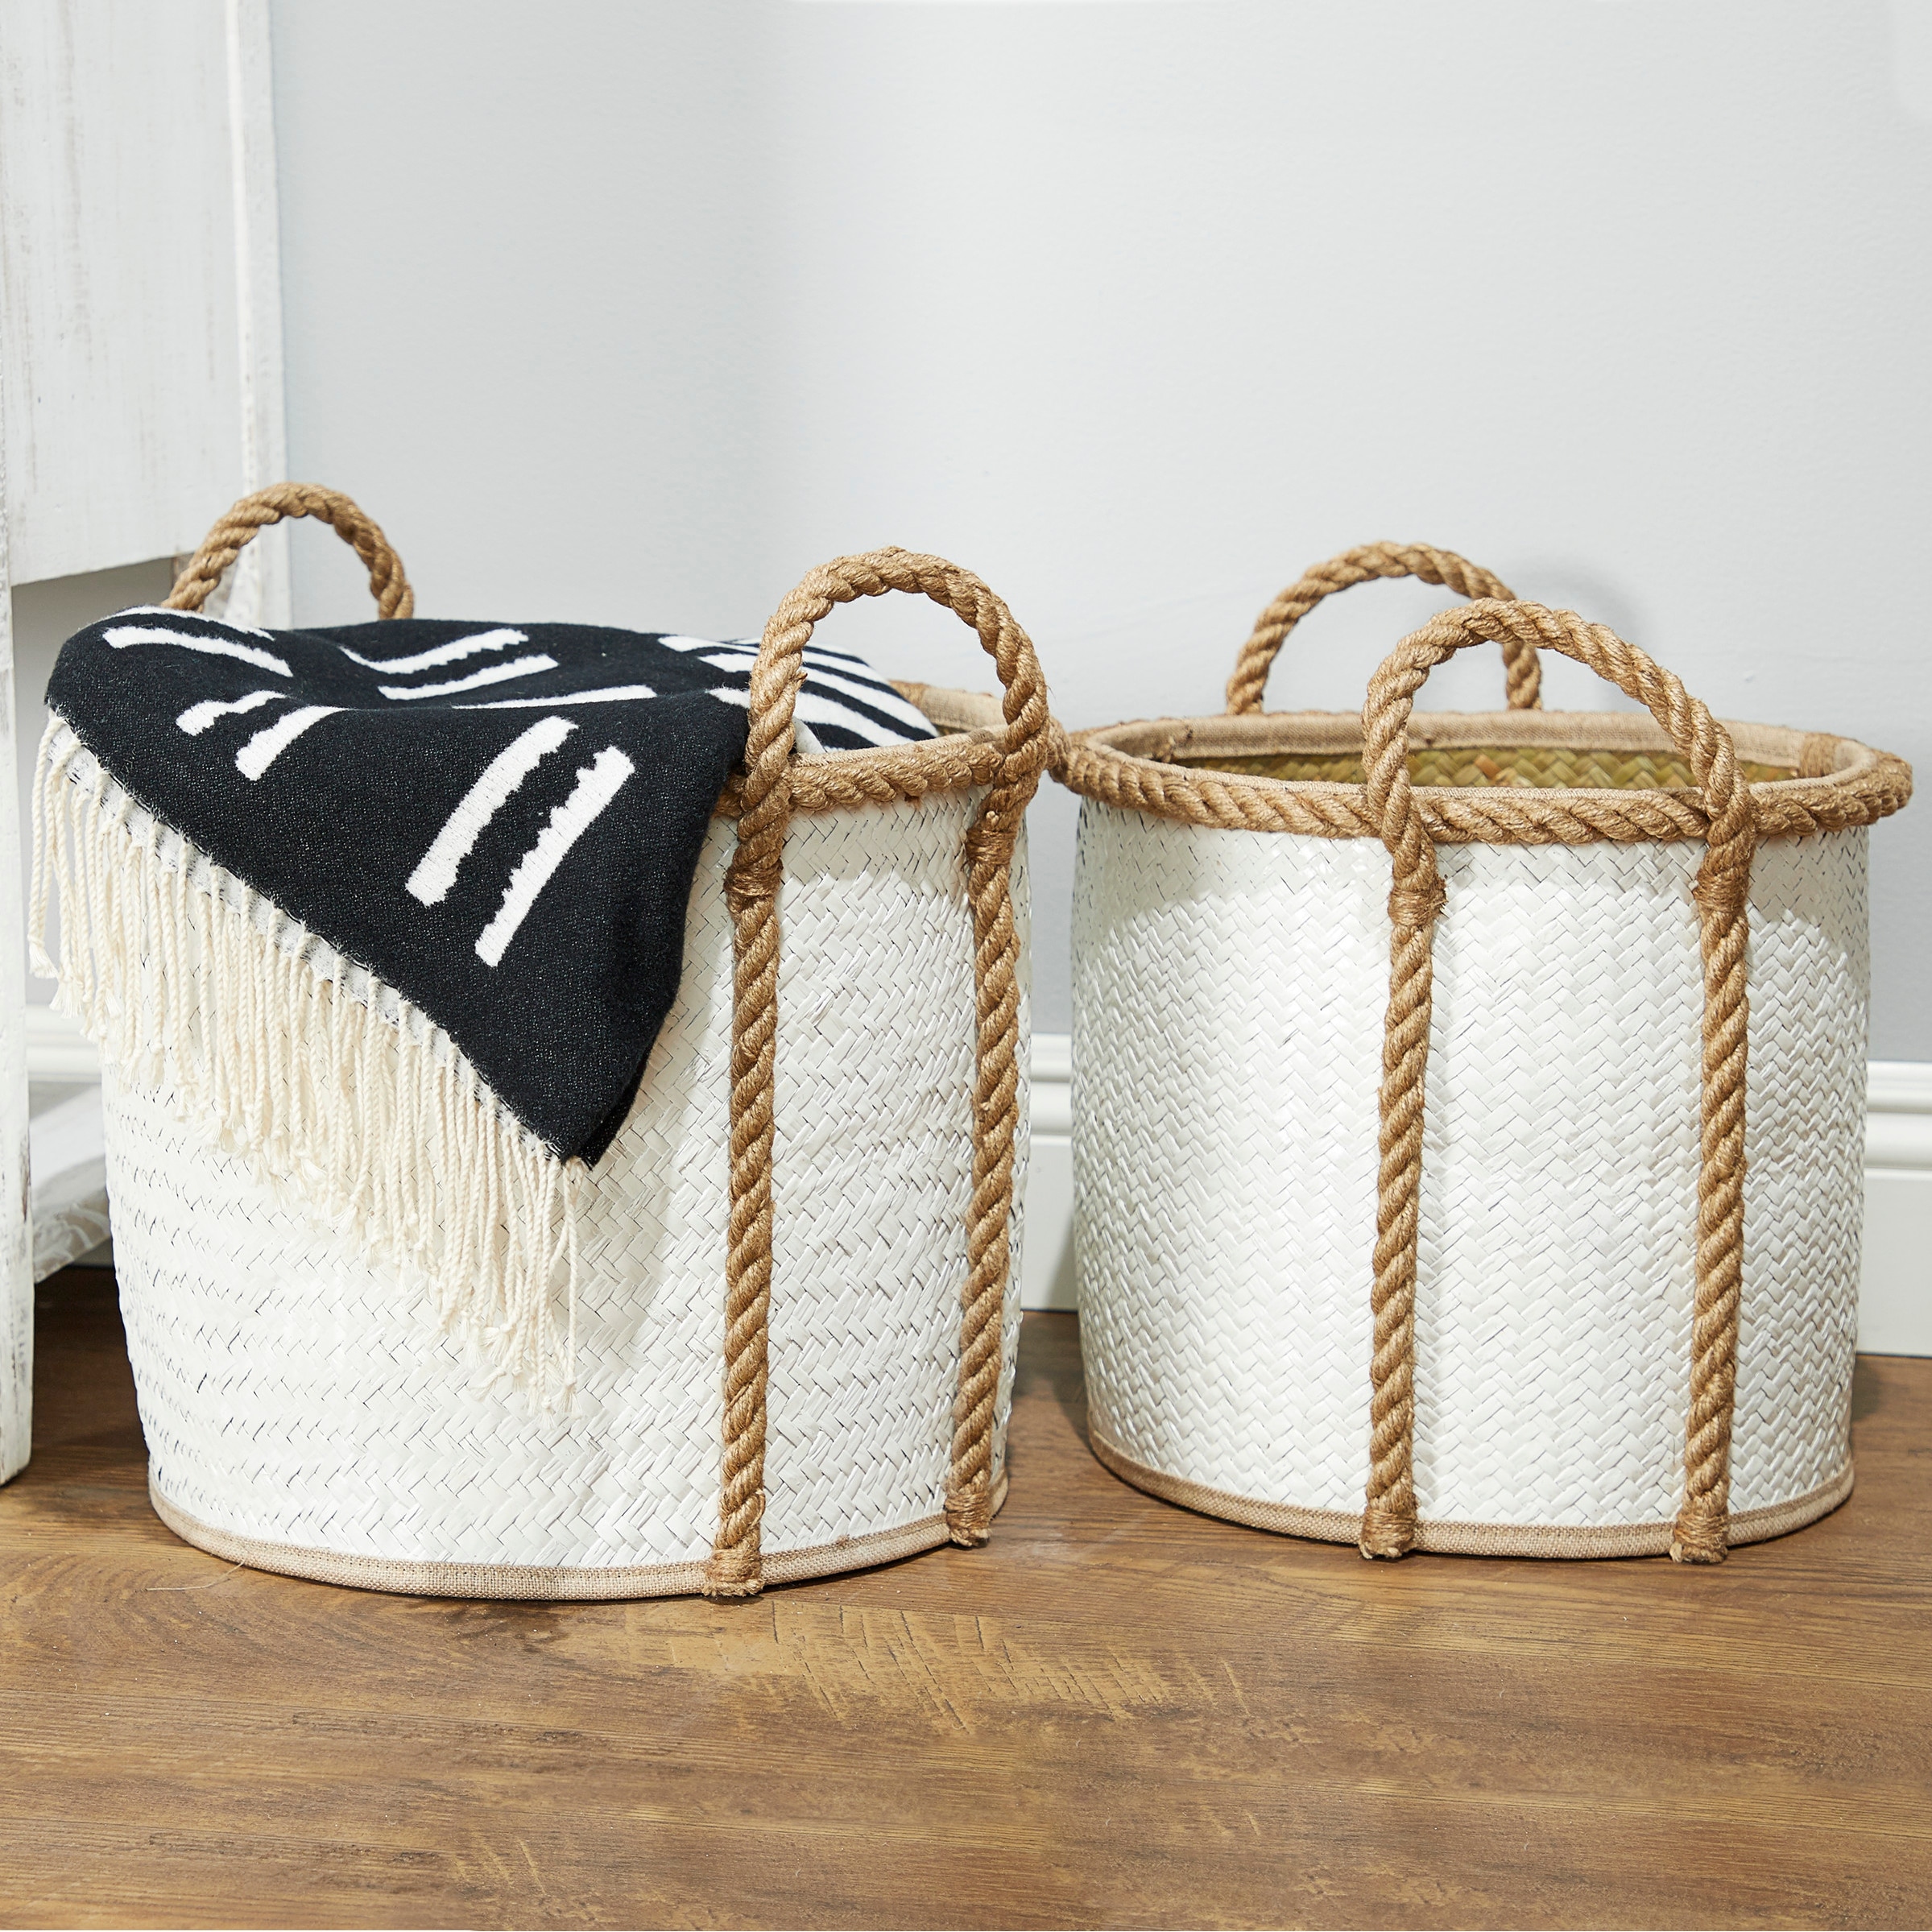 https://ak1.ostkcdn.com/images/products/is/images/direct/c94991cbd7dfdfce0849d6338c6f11a41fd97831/White-Dried-Plant-Material-Coastal-Storage-Basket-%28Set-of-3%29.jpg